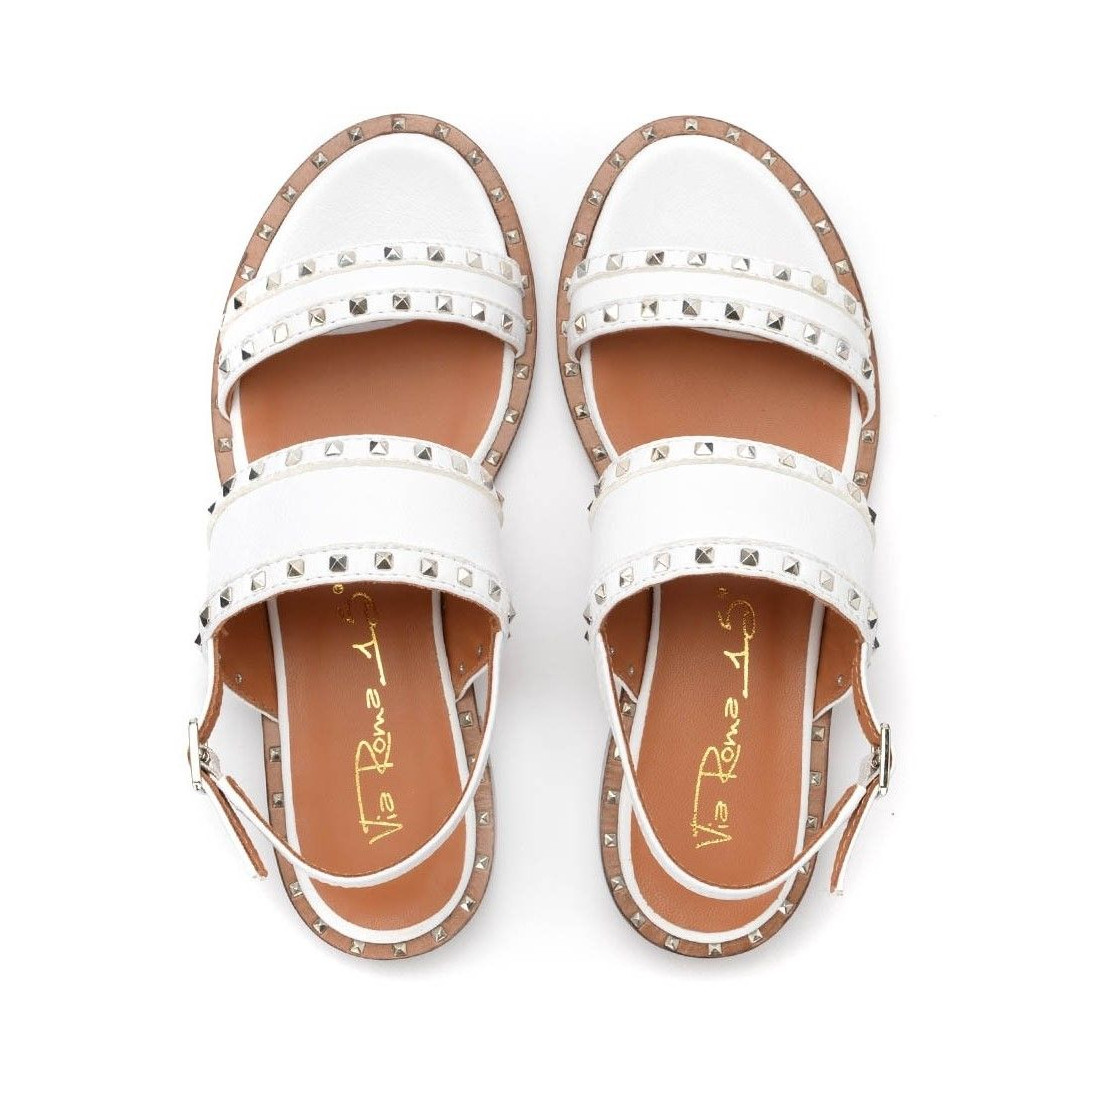 Via Roma 15 women's flat sandal in white leather with studs